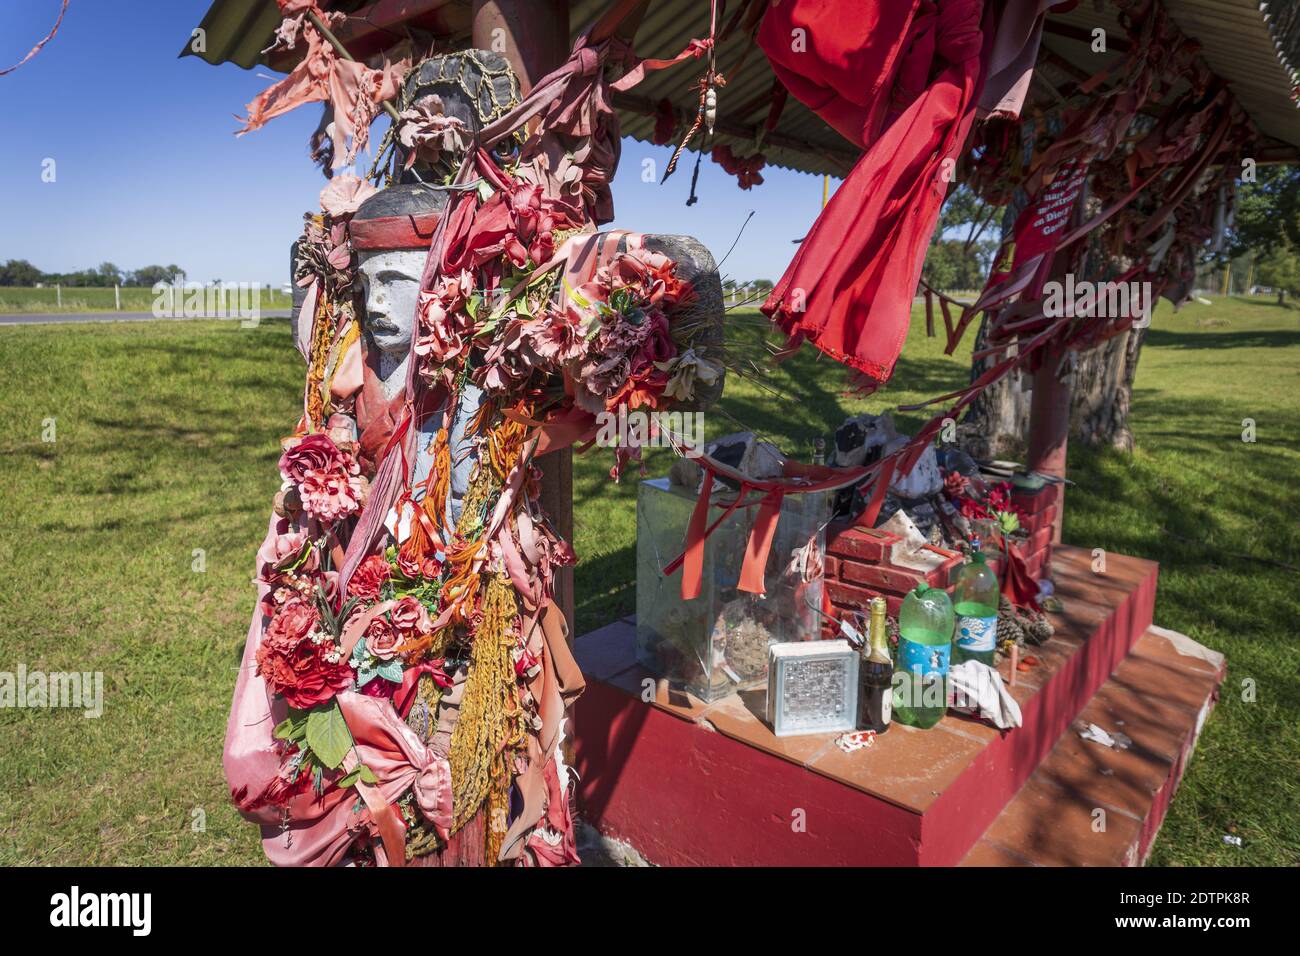 FIRMAT, ARGENTINA - Dec 21, 2020: A shrine in honor of Gauchito Gil, the most prominent folk religious figure,  in the outskirts of Firmat, Santa Fe, Stock Photo